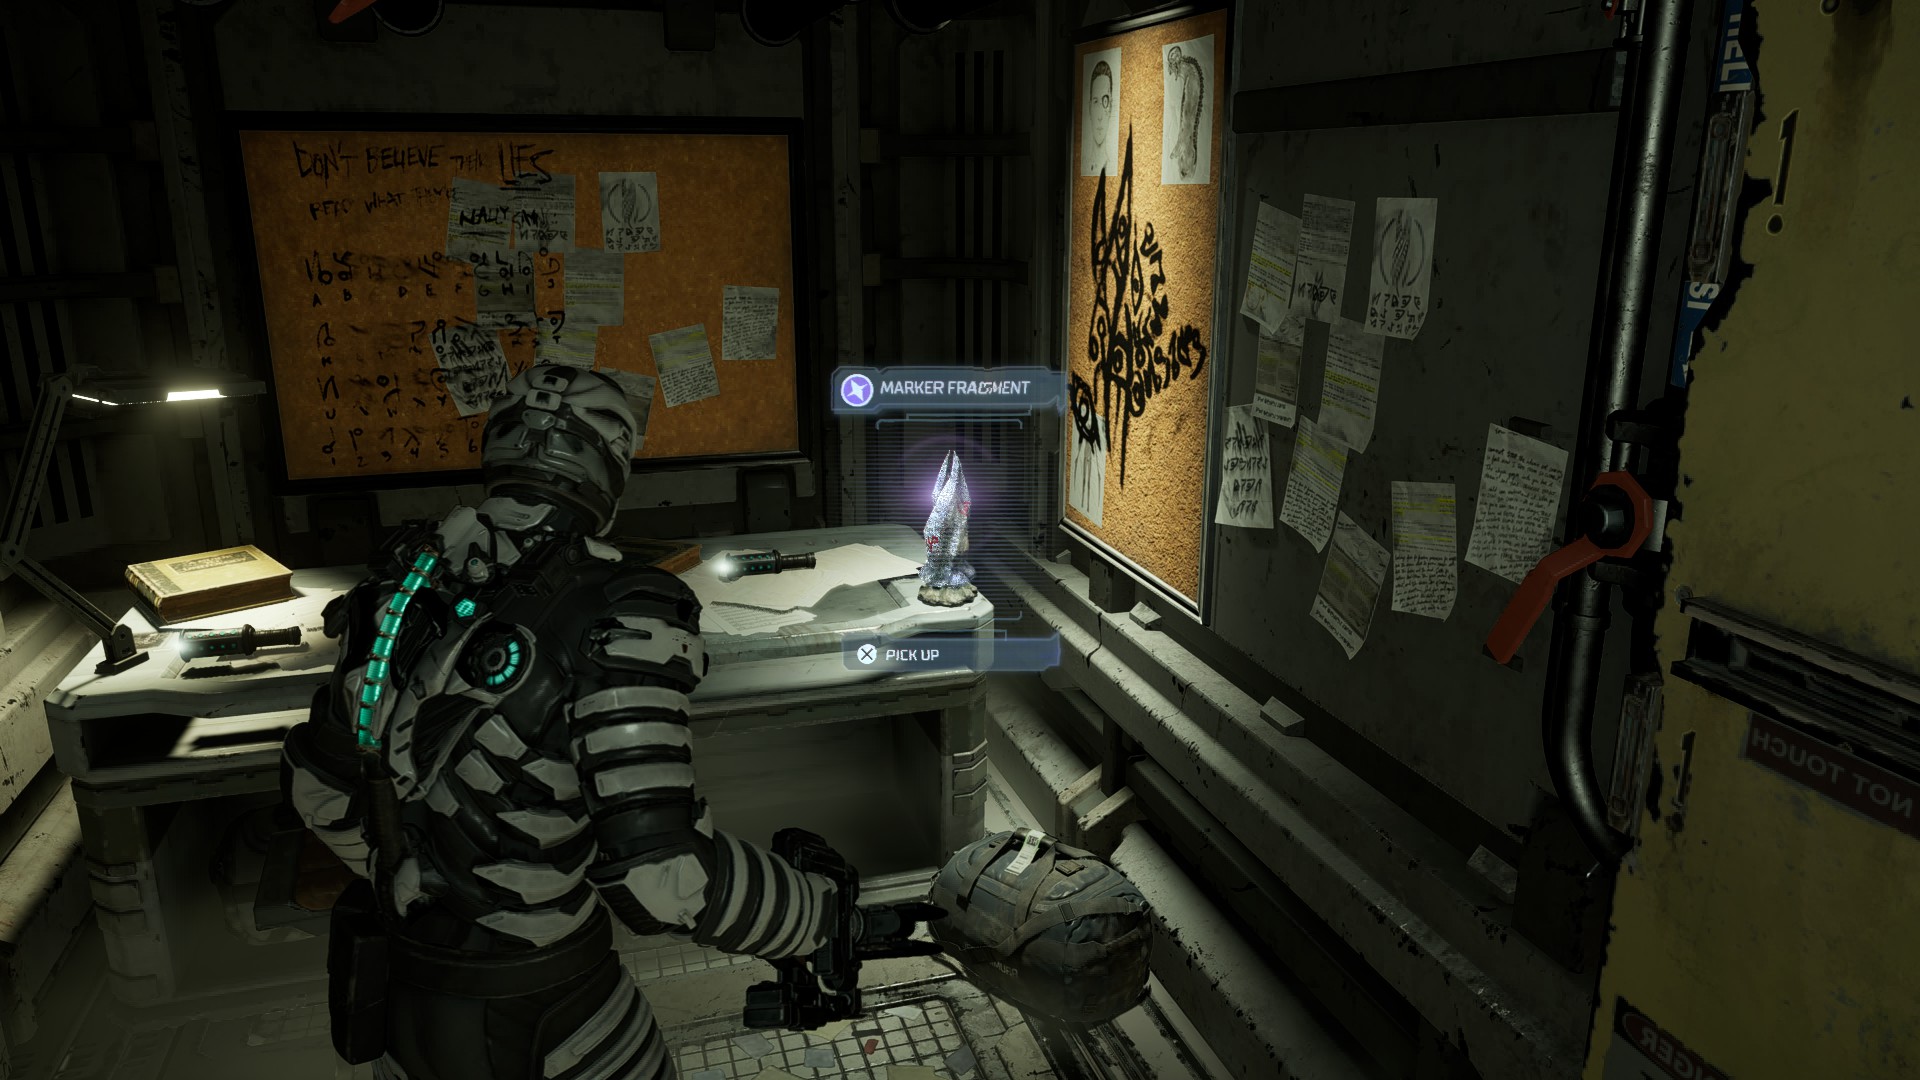 Dead Space Marker Fragment location in Medical